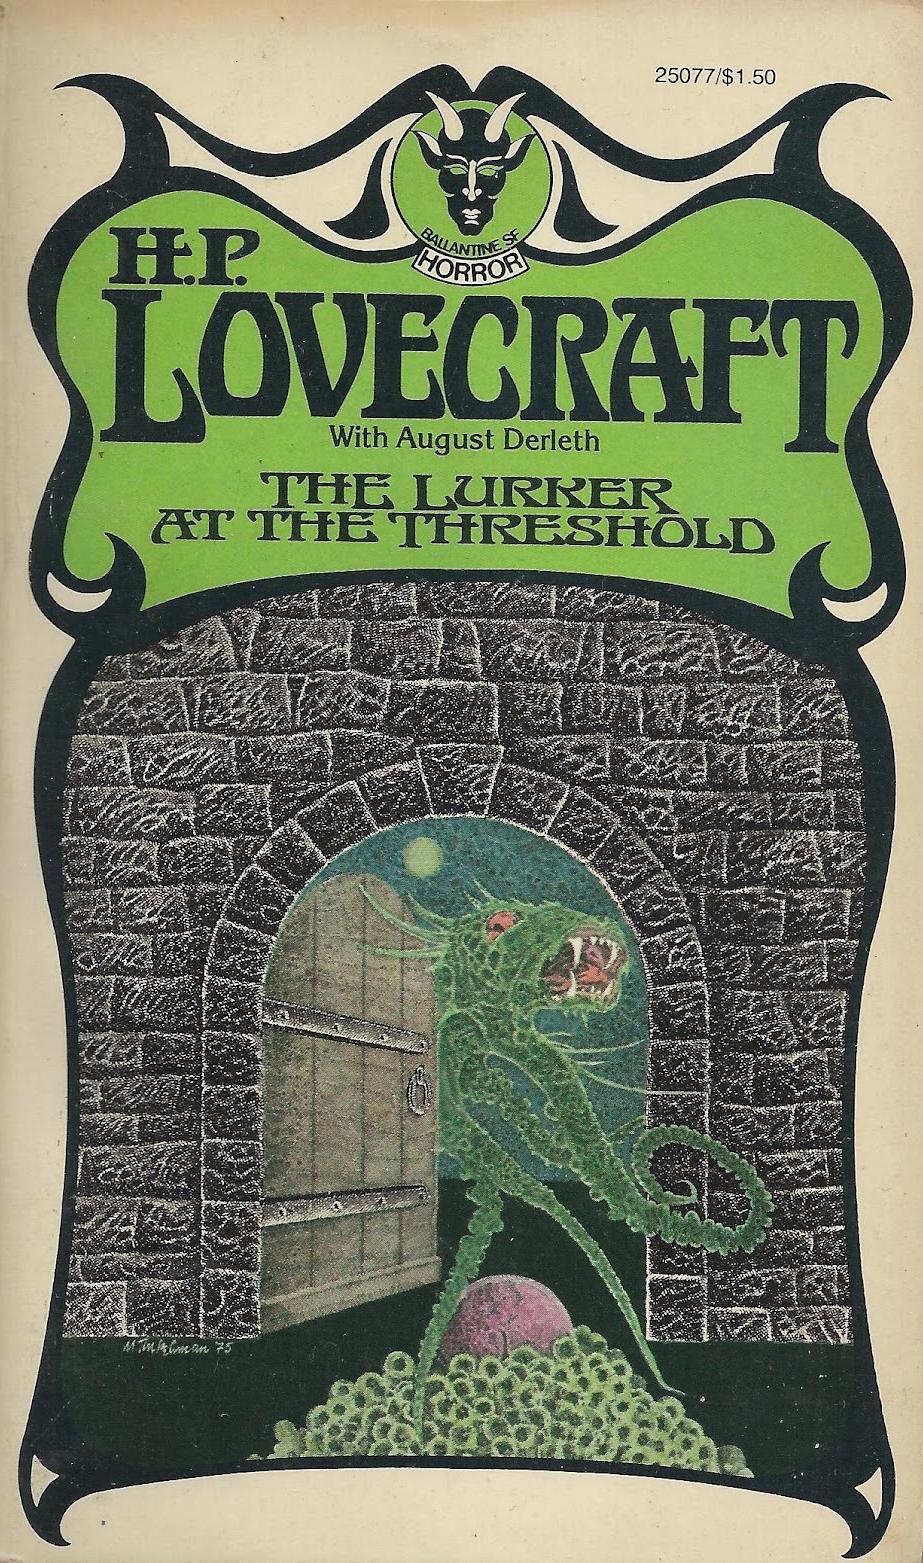 Murray Tinkelman - Cover for H.P Lovecraft's "The Lurker At The Threshold"